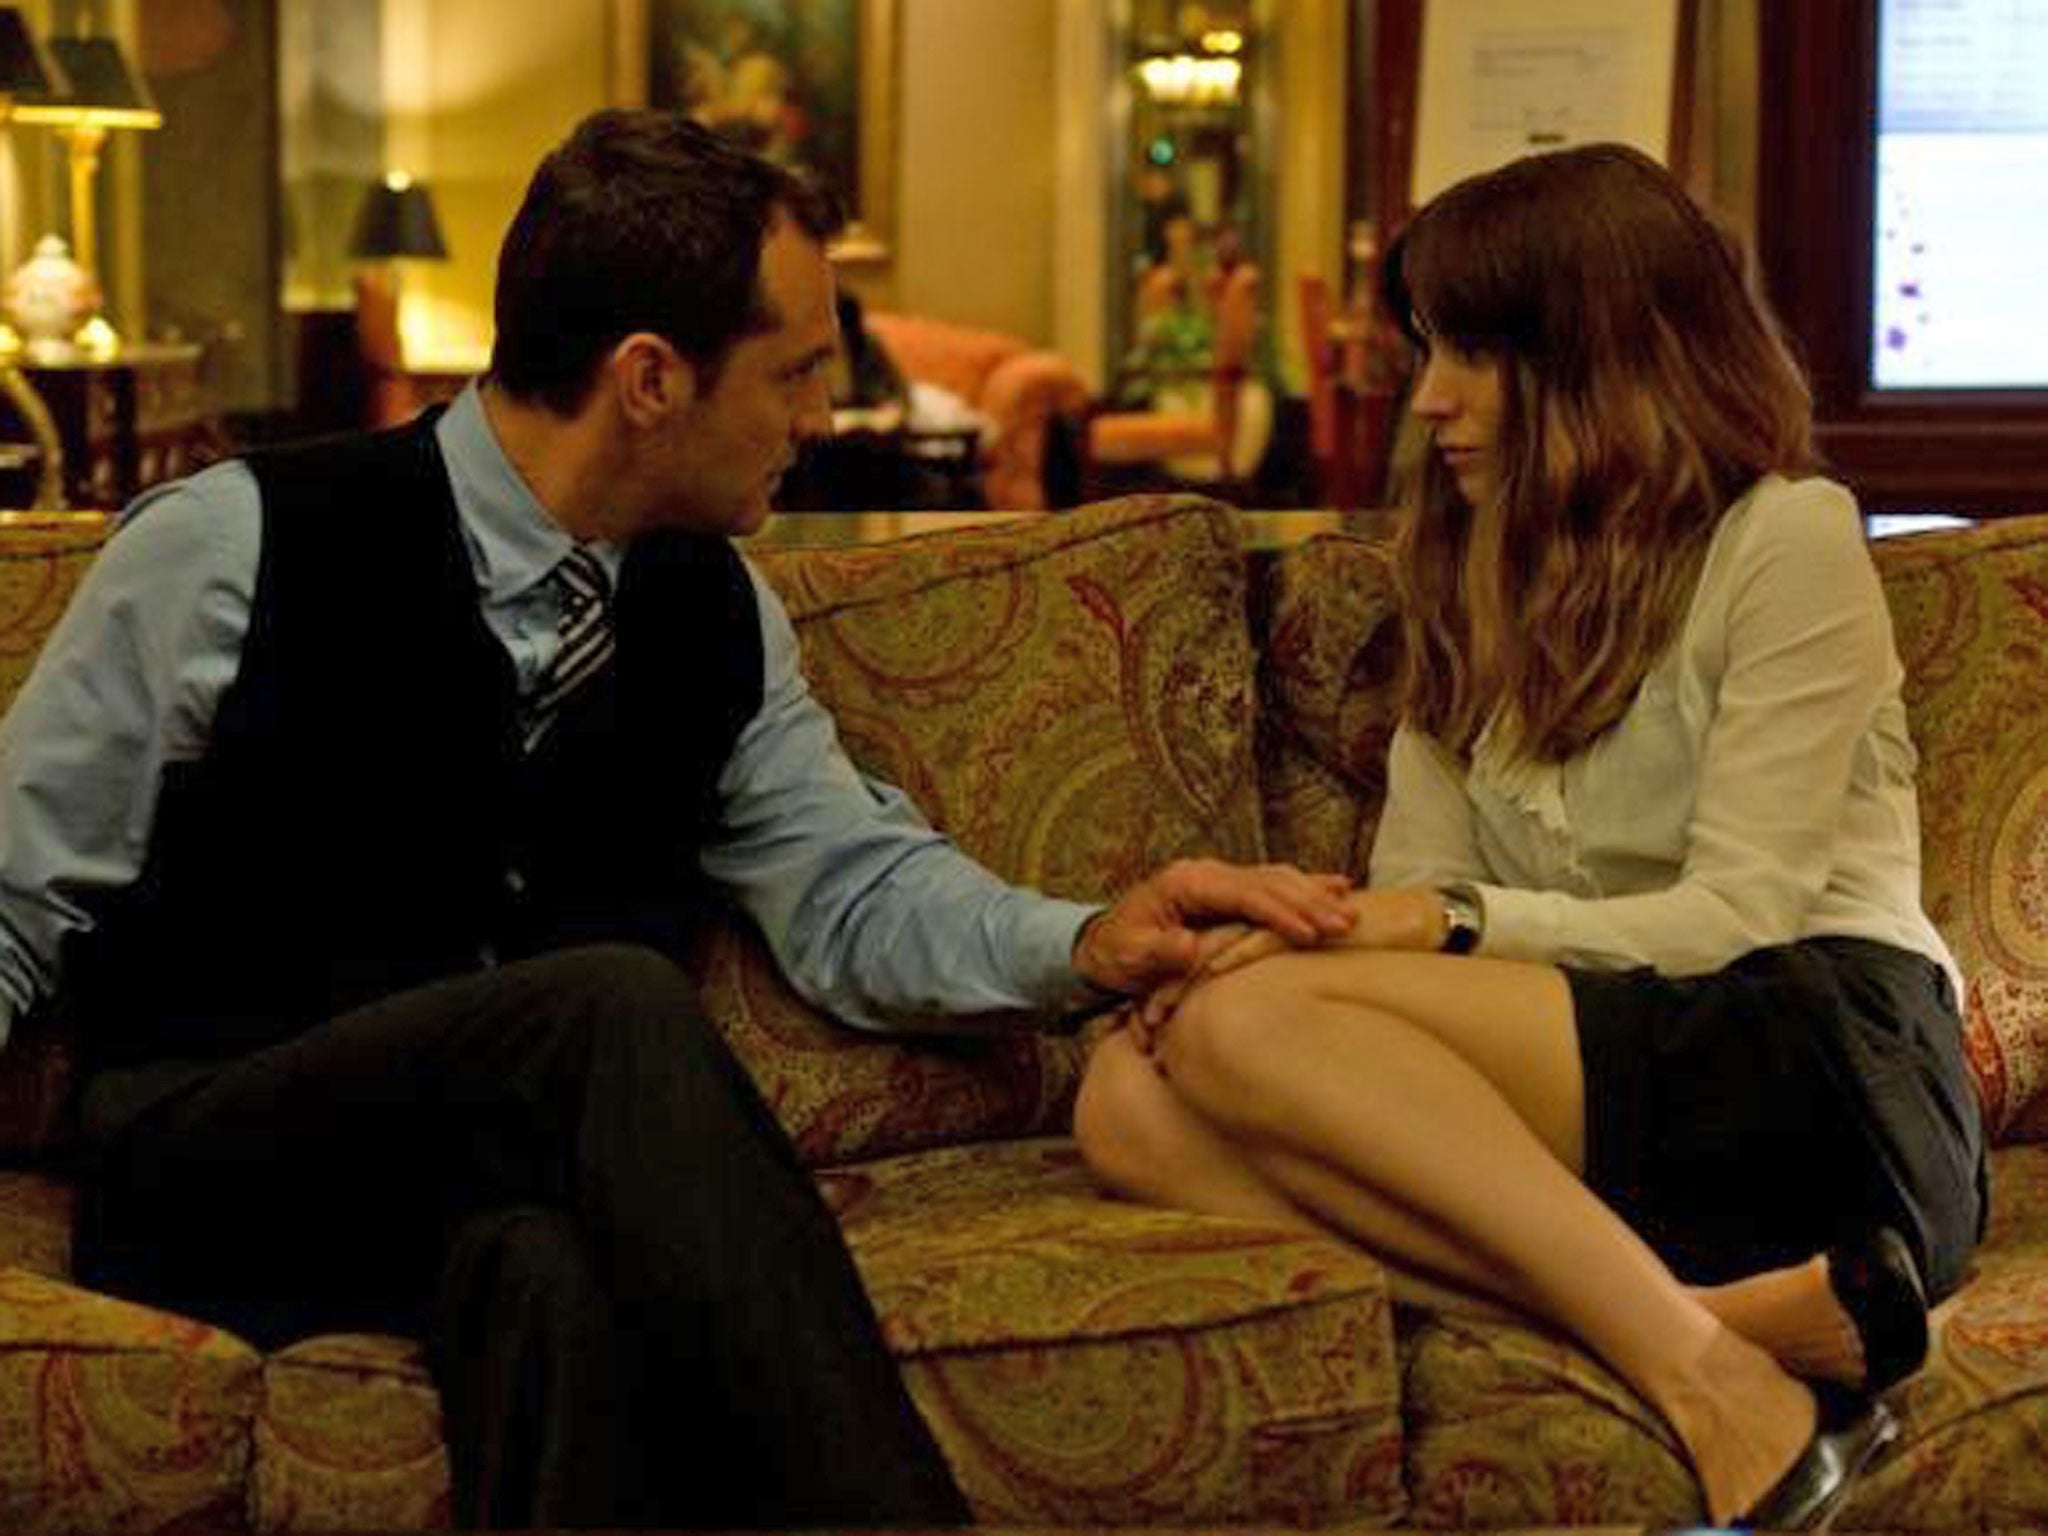 Odd couple: Jude Law and Rooney Mara in Steven Soderbergh’s Side Effects